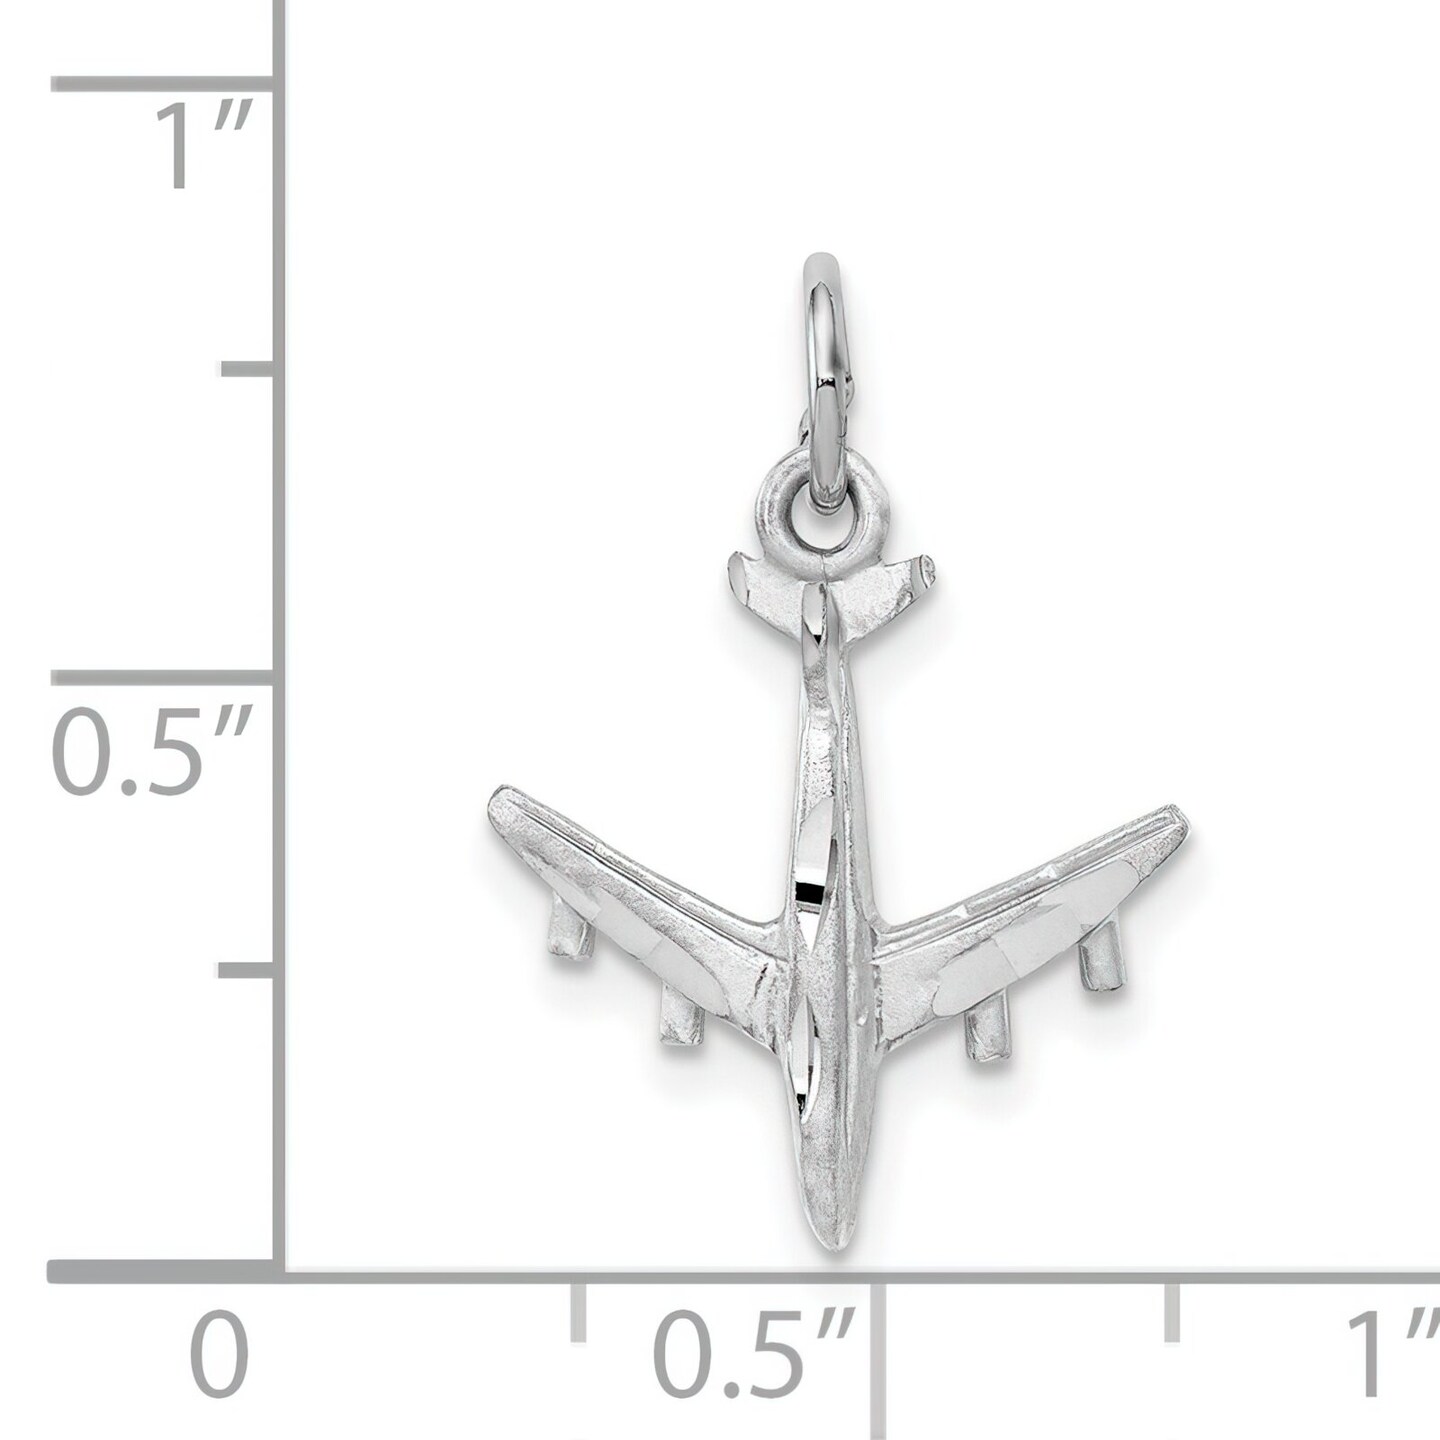 14K White Gold Polished 3D Airplane Charm Jewelry 21.5mm x 16mm